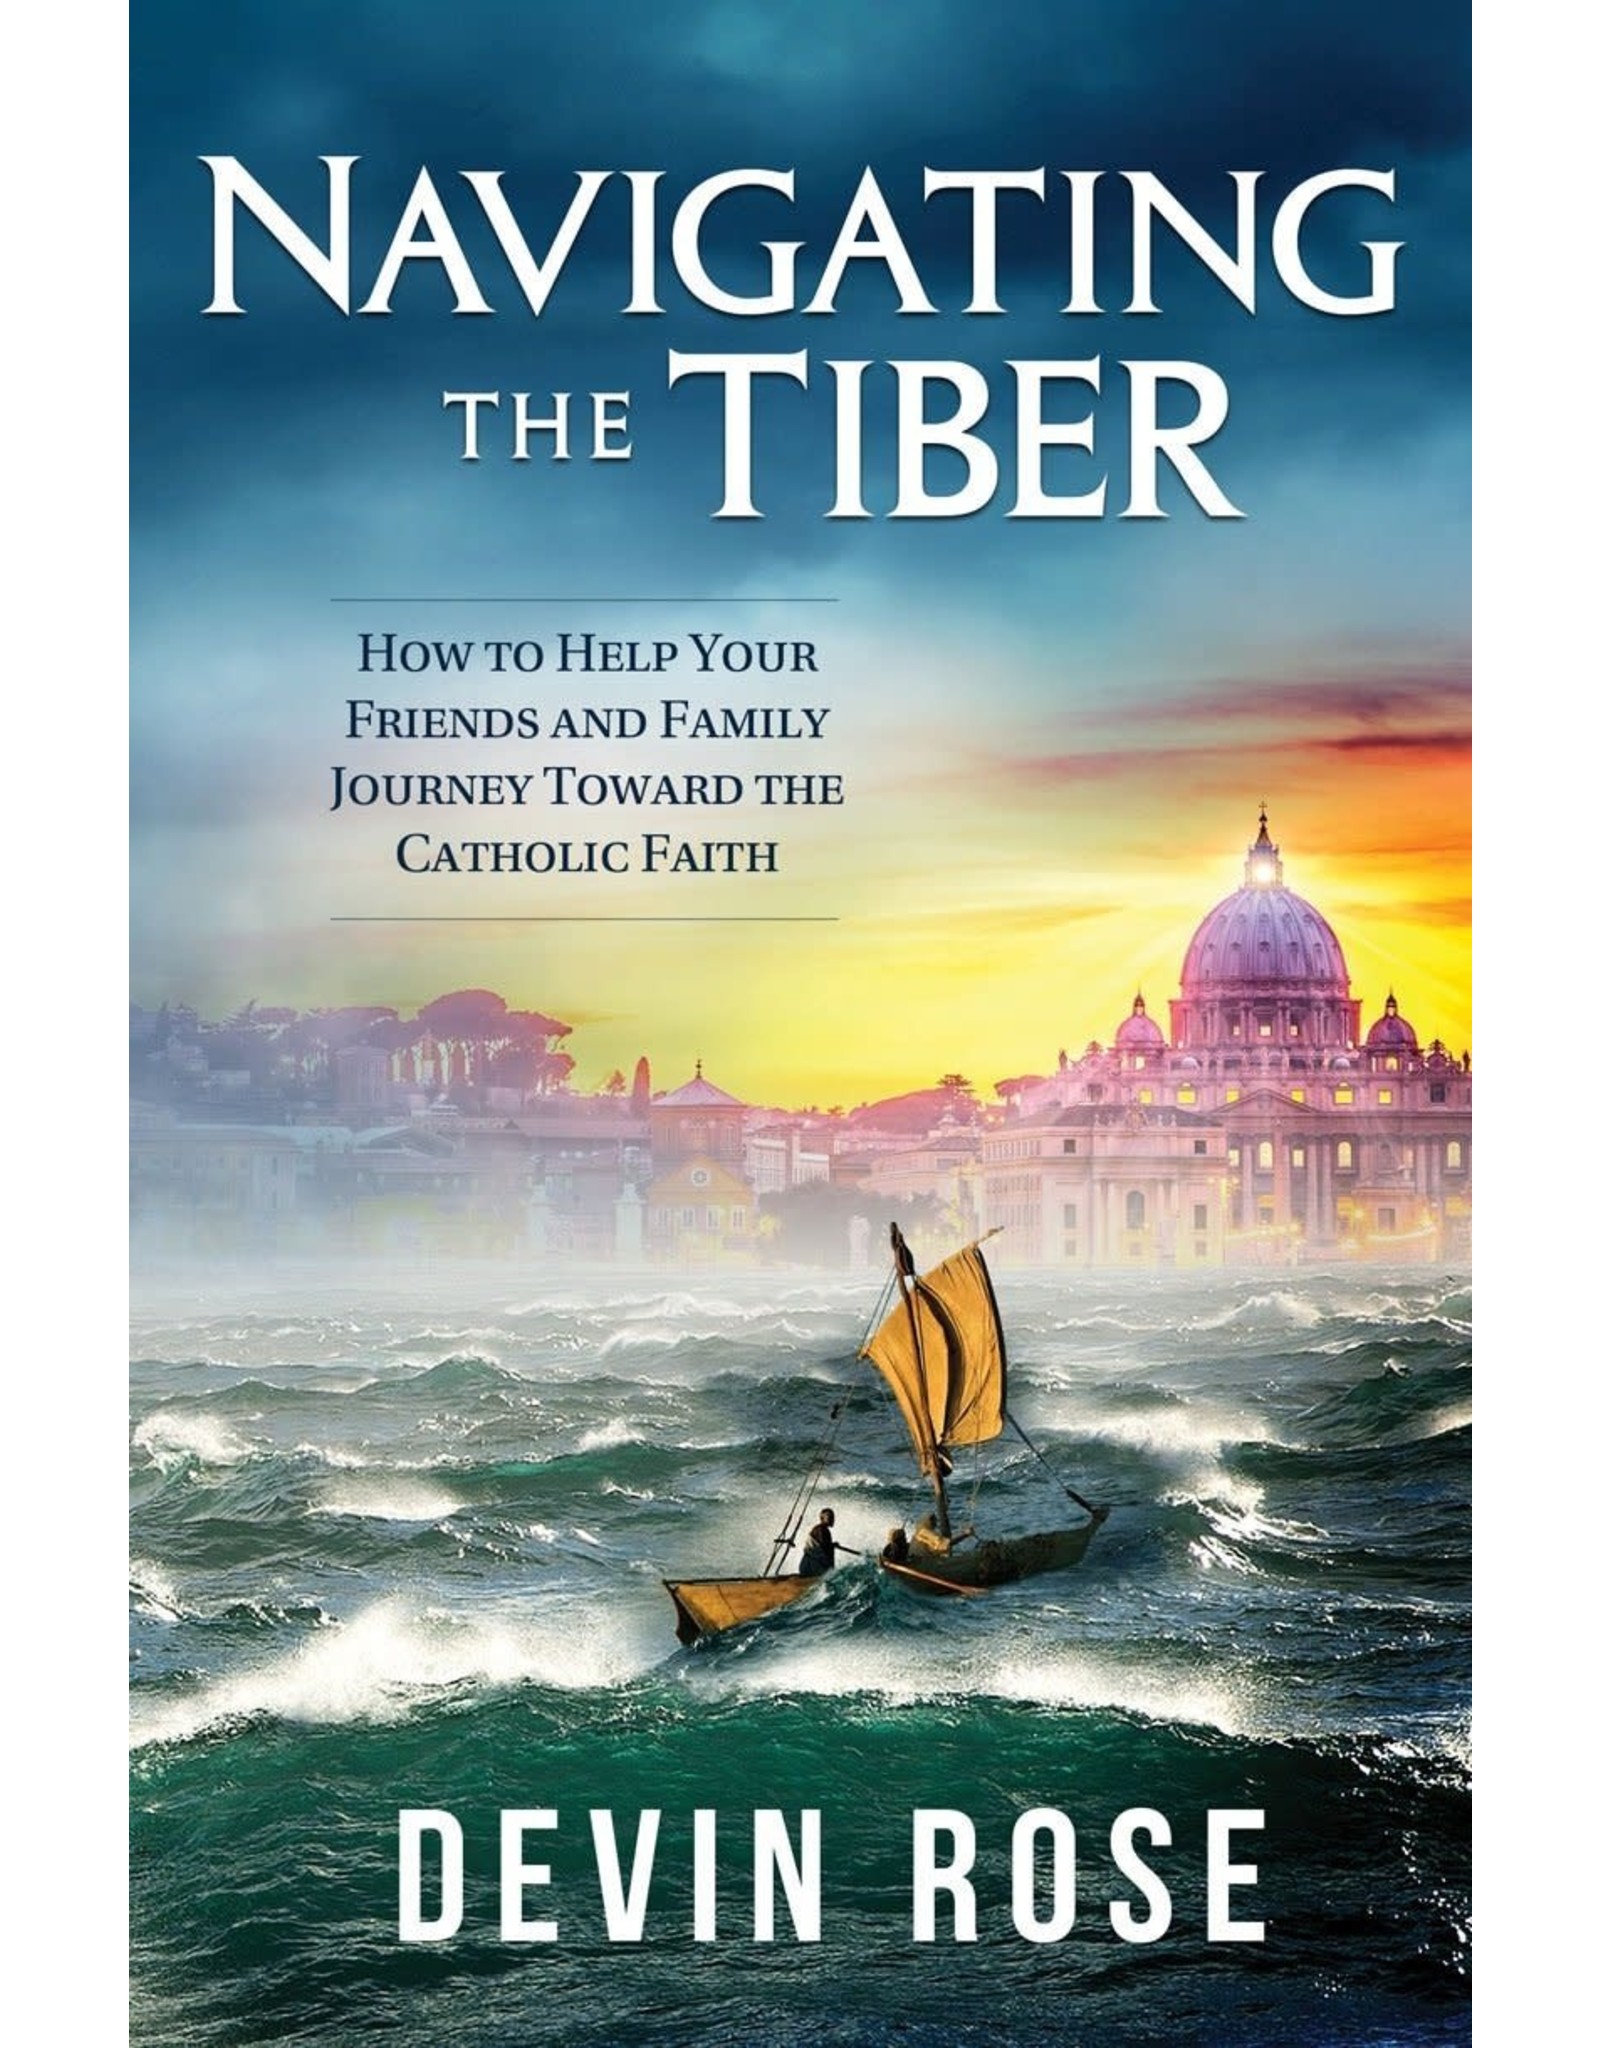 Navigating the Tiber: How to Help Your Friends and Family Journey Toward the Catholic Faith